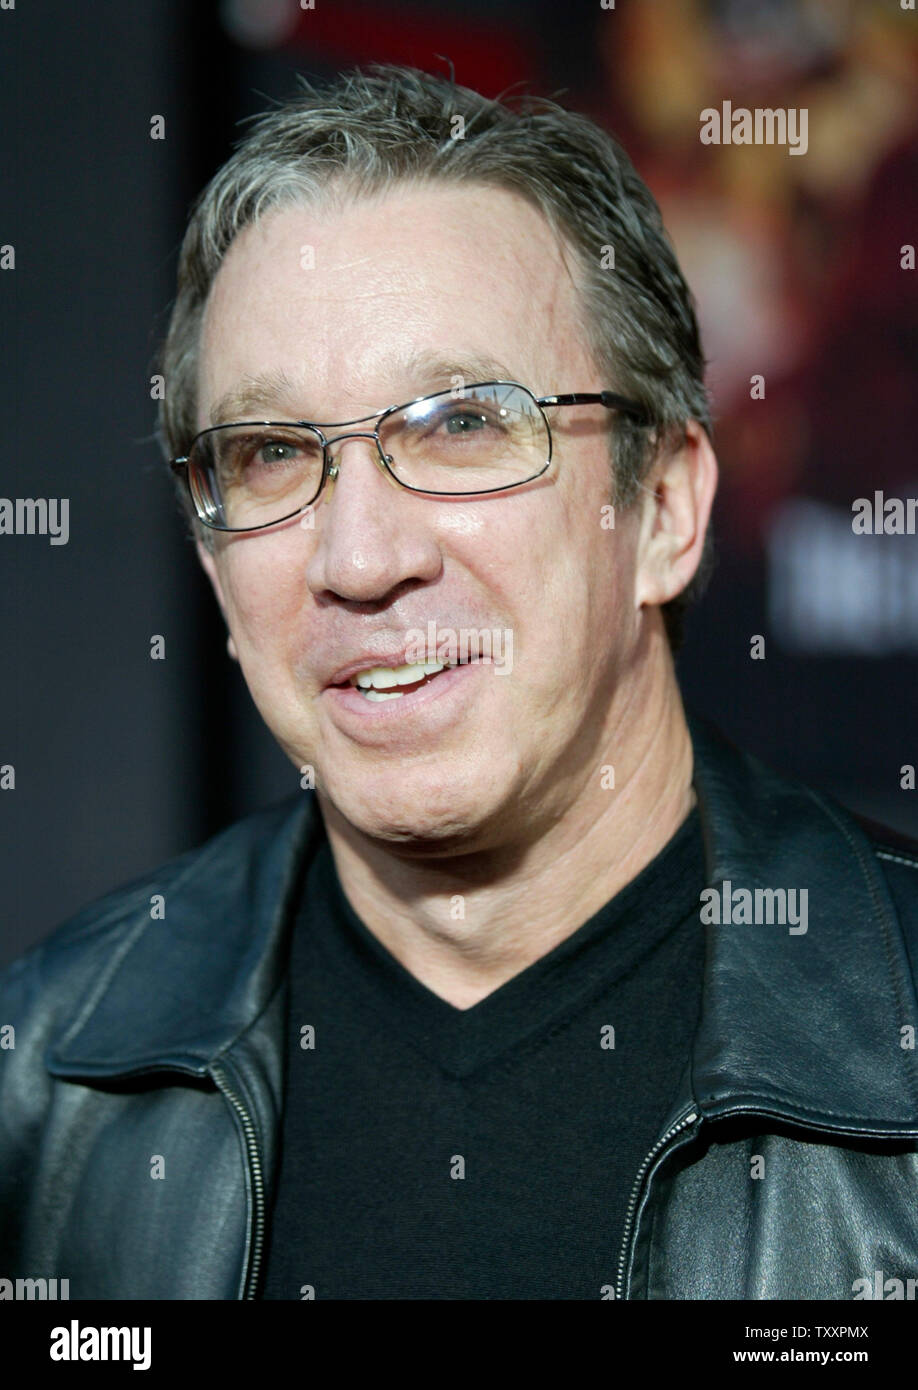 Actor Tim Allen, a guest at the premiere of the new animated film from Pixar, 'The Incredibles'  poses for photographers at the El Capitan Theatre in Los Angeles,  October 24, 2004. The film opens in the United States November 5th. (UPI Photo/Francis Specker) Stock Photo